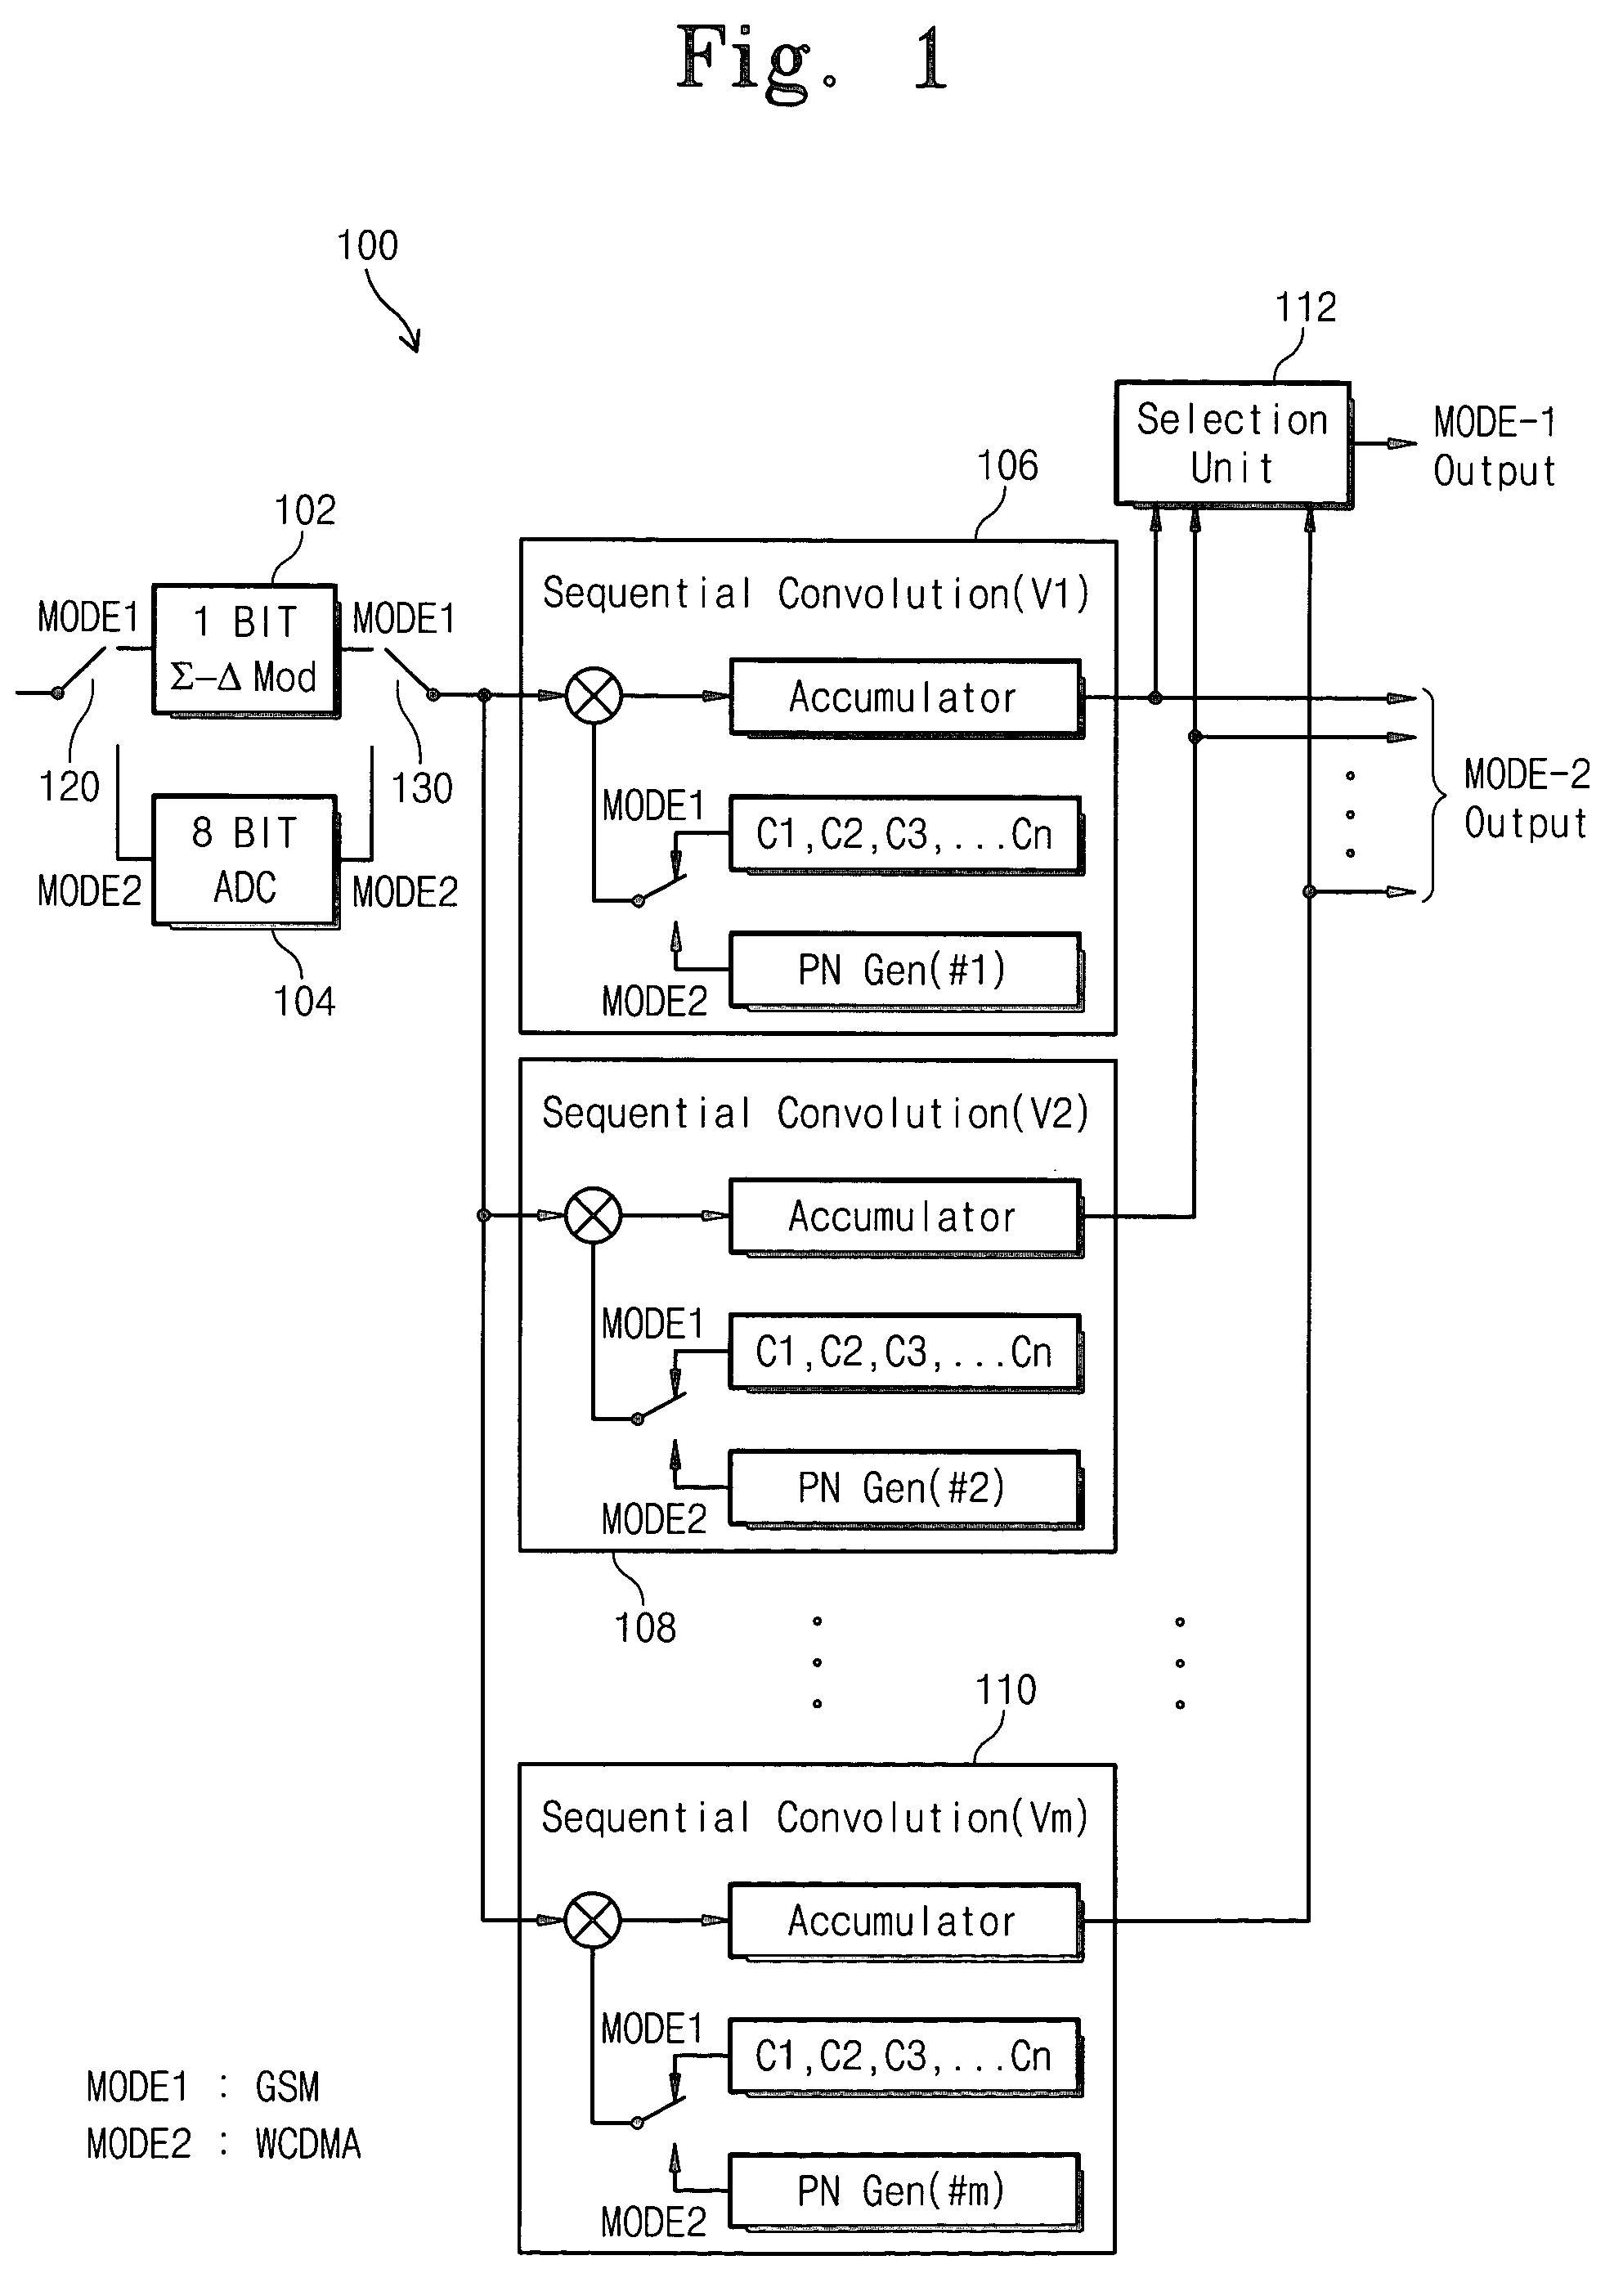 Multi-mode communication device operable in GSM/WCDMA